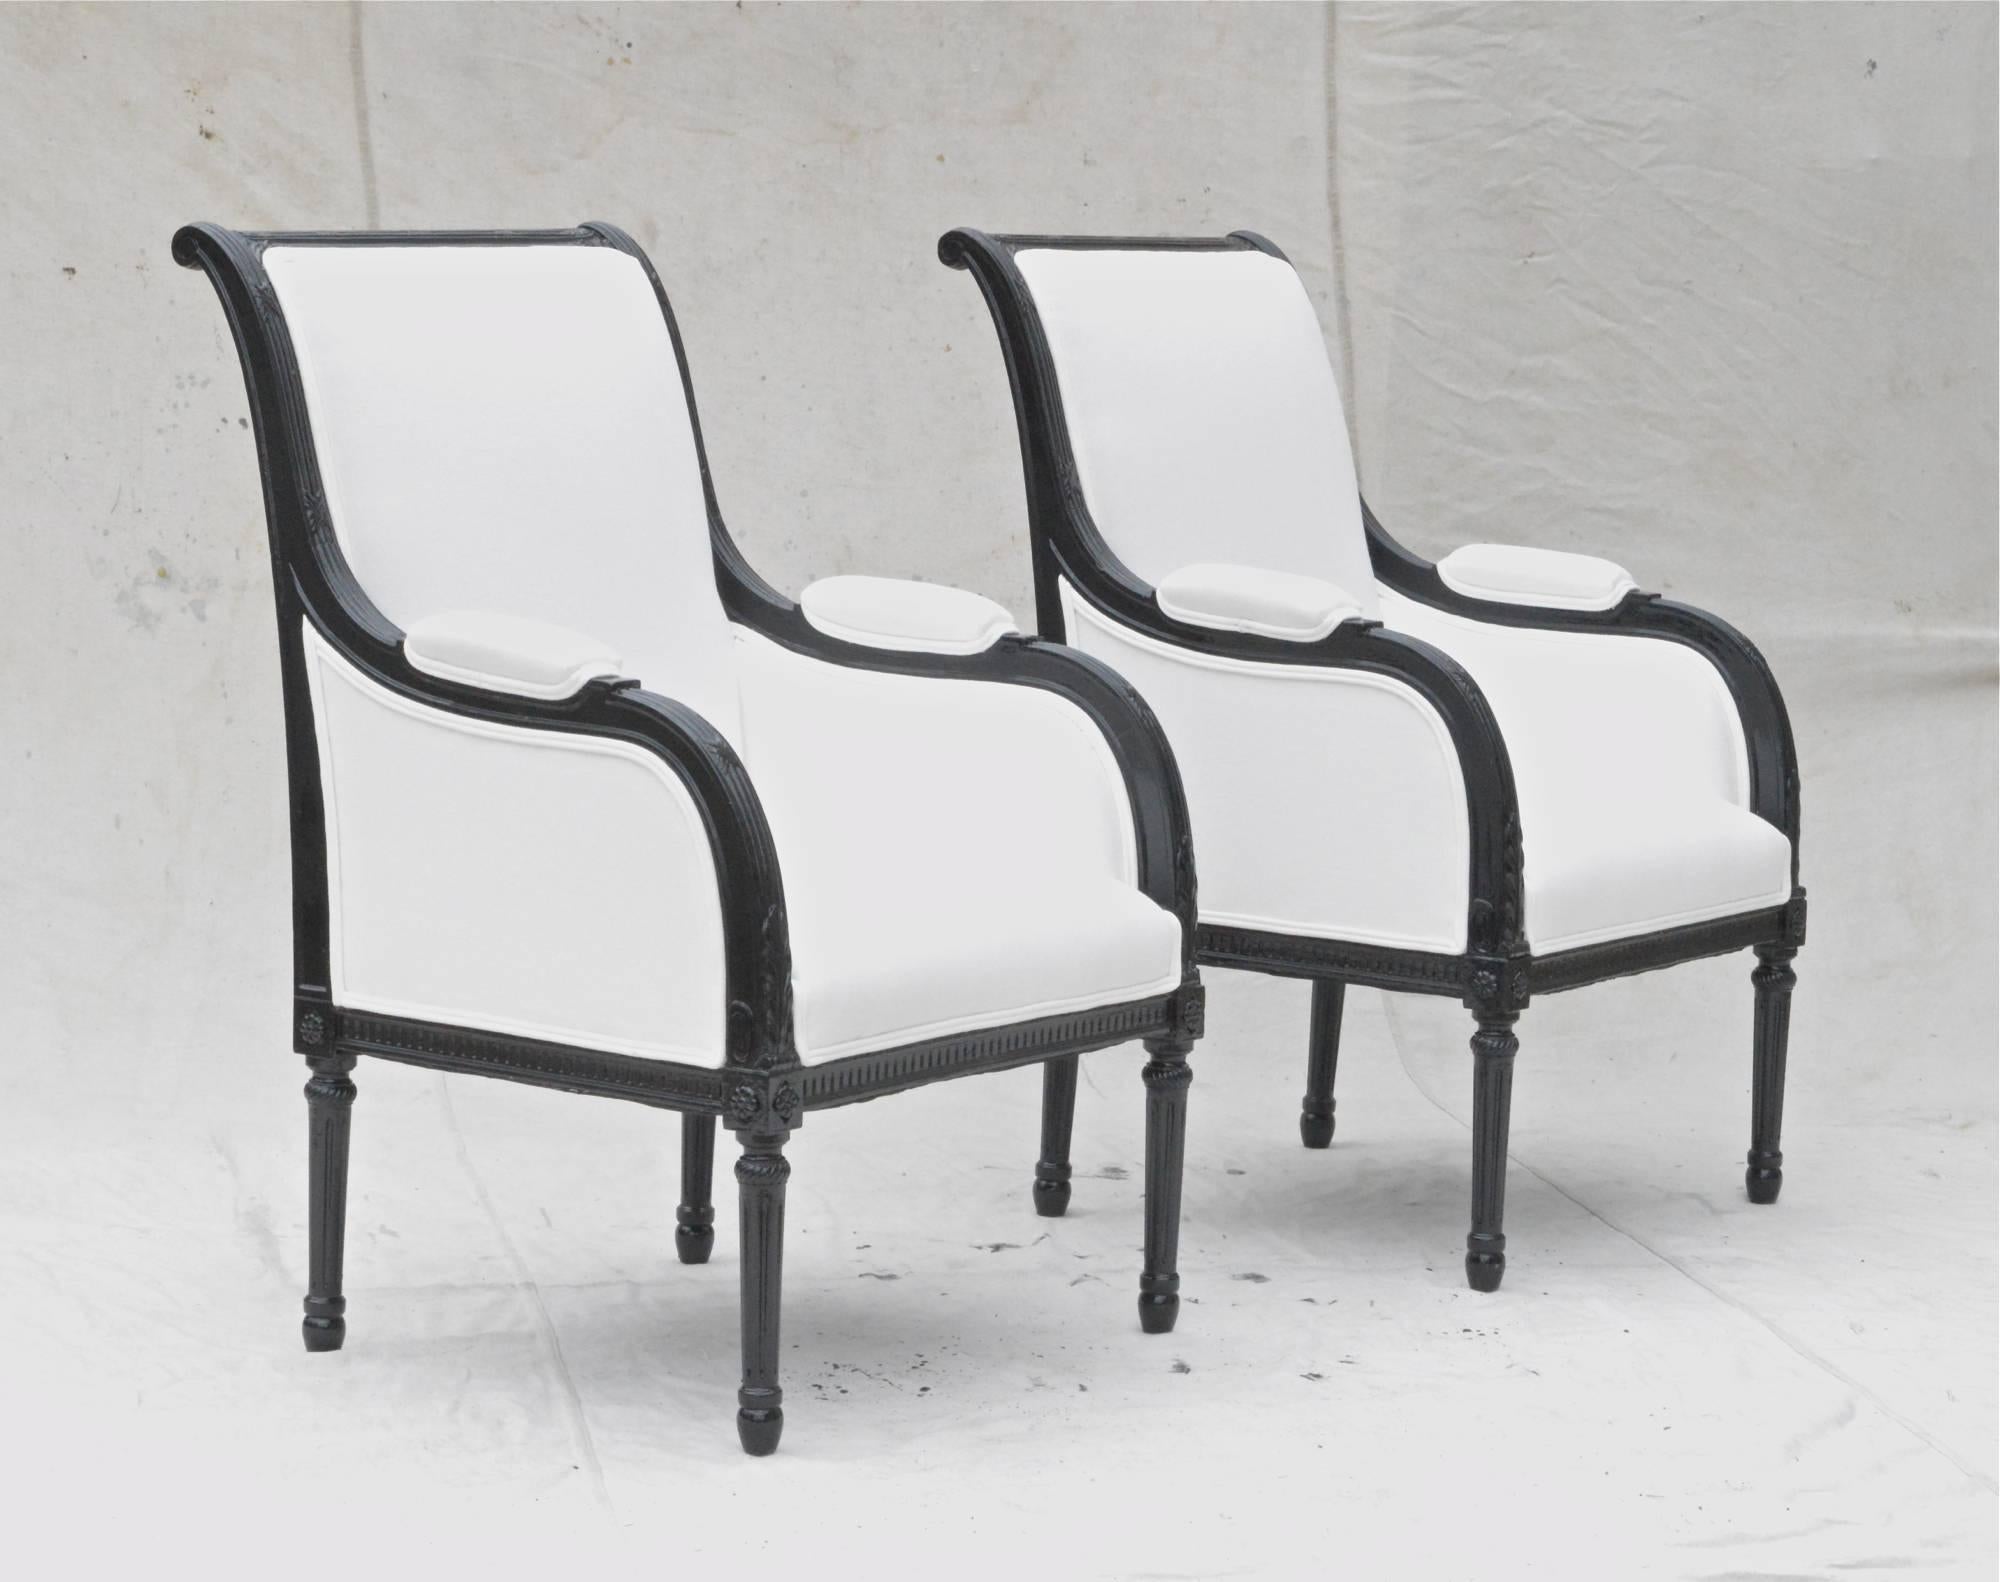 20th Century Directoire Styled Library Chairs in Black and White